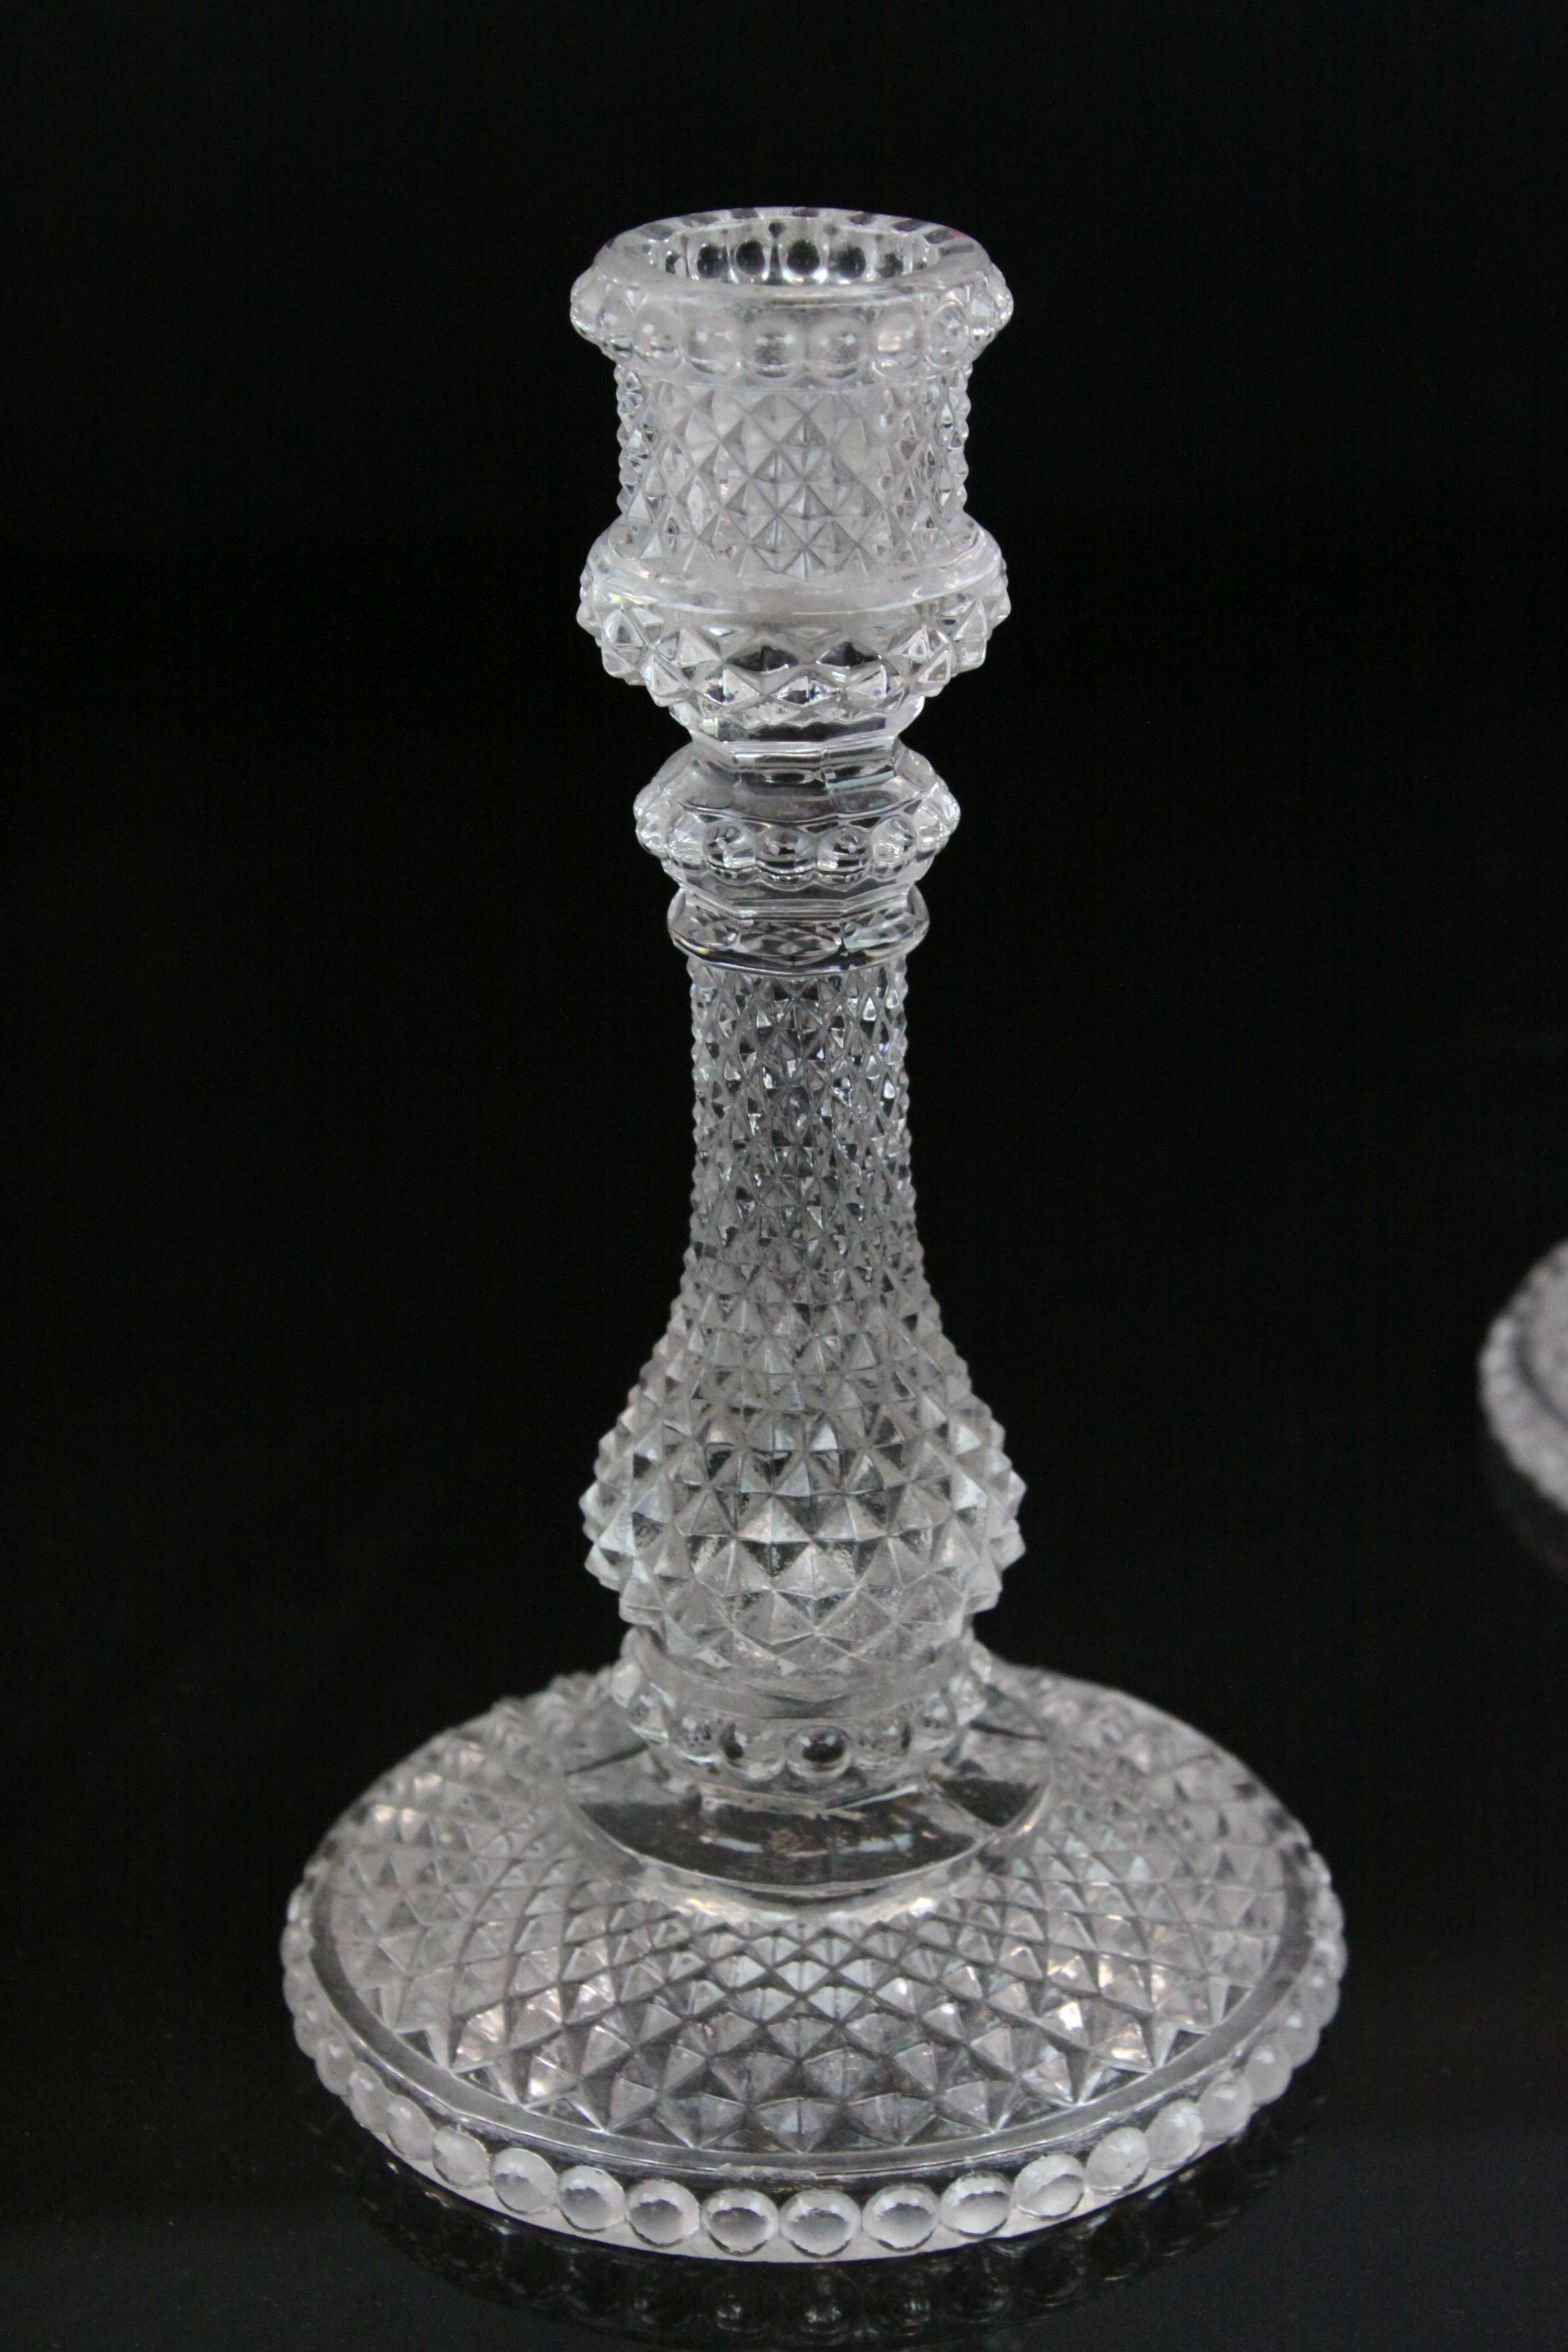 Pair of Baccarat Hobnail Glass Candlesticks, 18cms high - Image 2 of 6